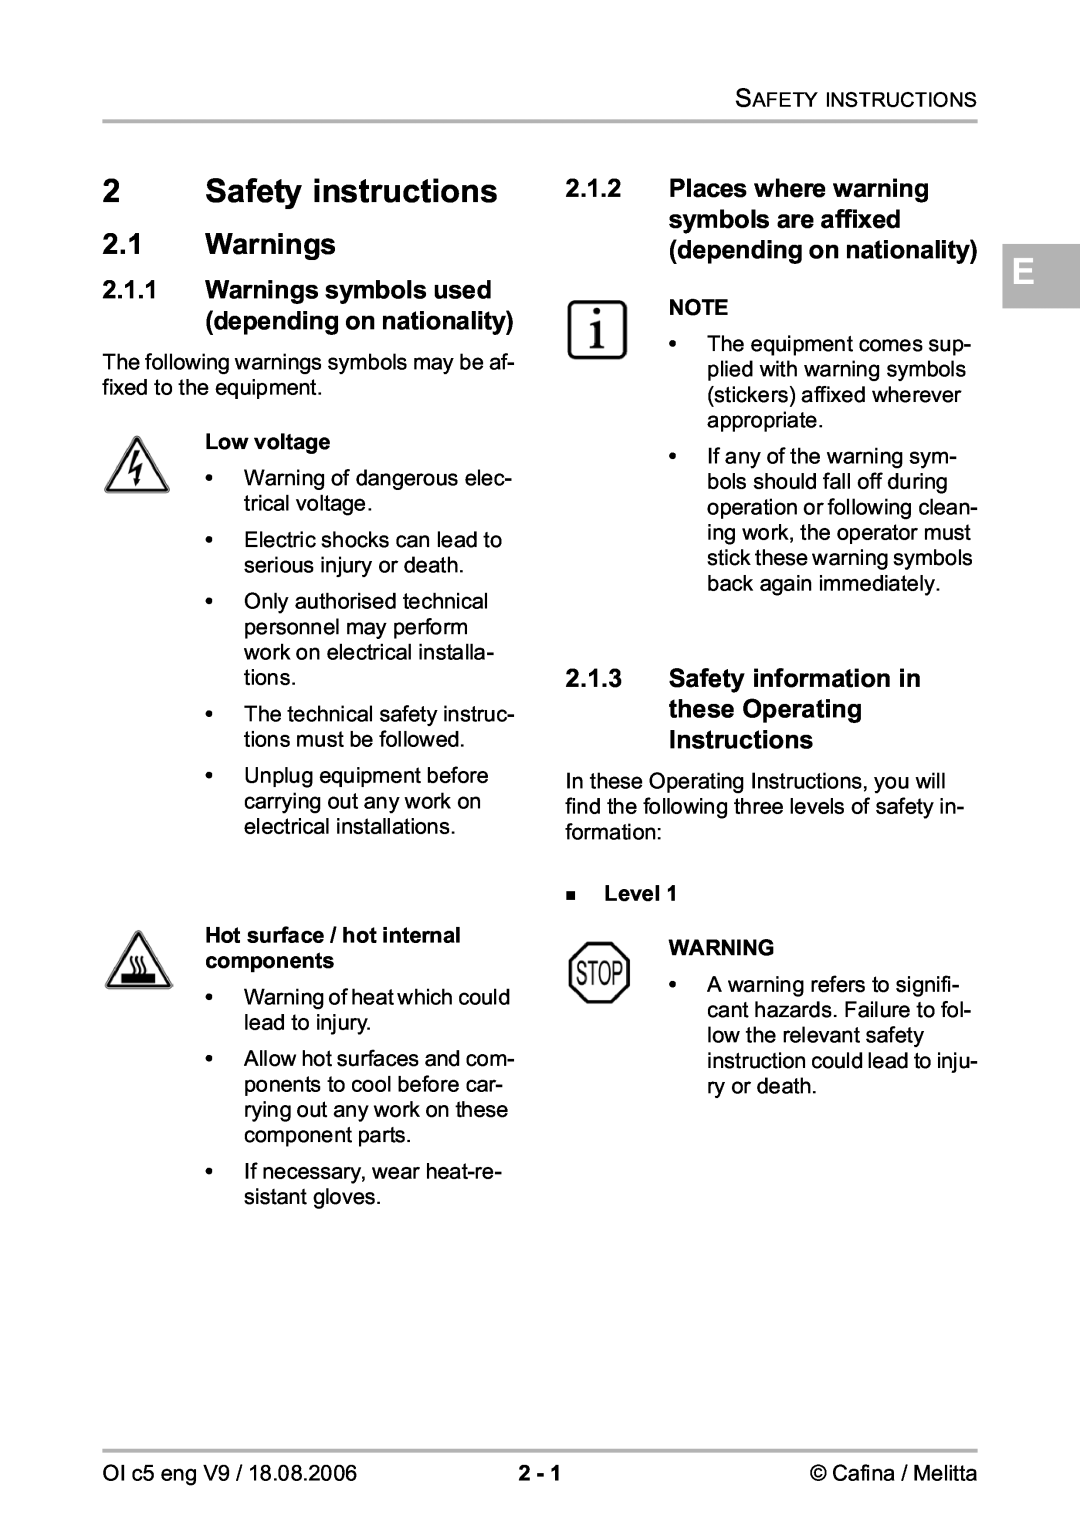 Melitta 2954076 Safety instructions, Warnings, Places where warning, Safety information in these Operating Instructions 